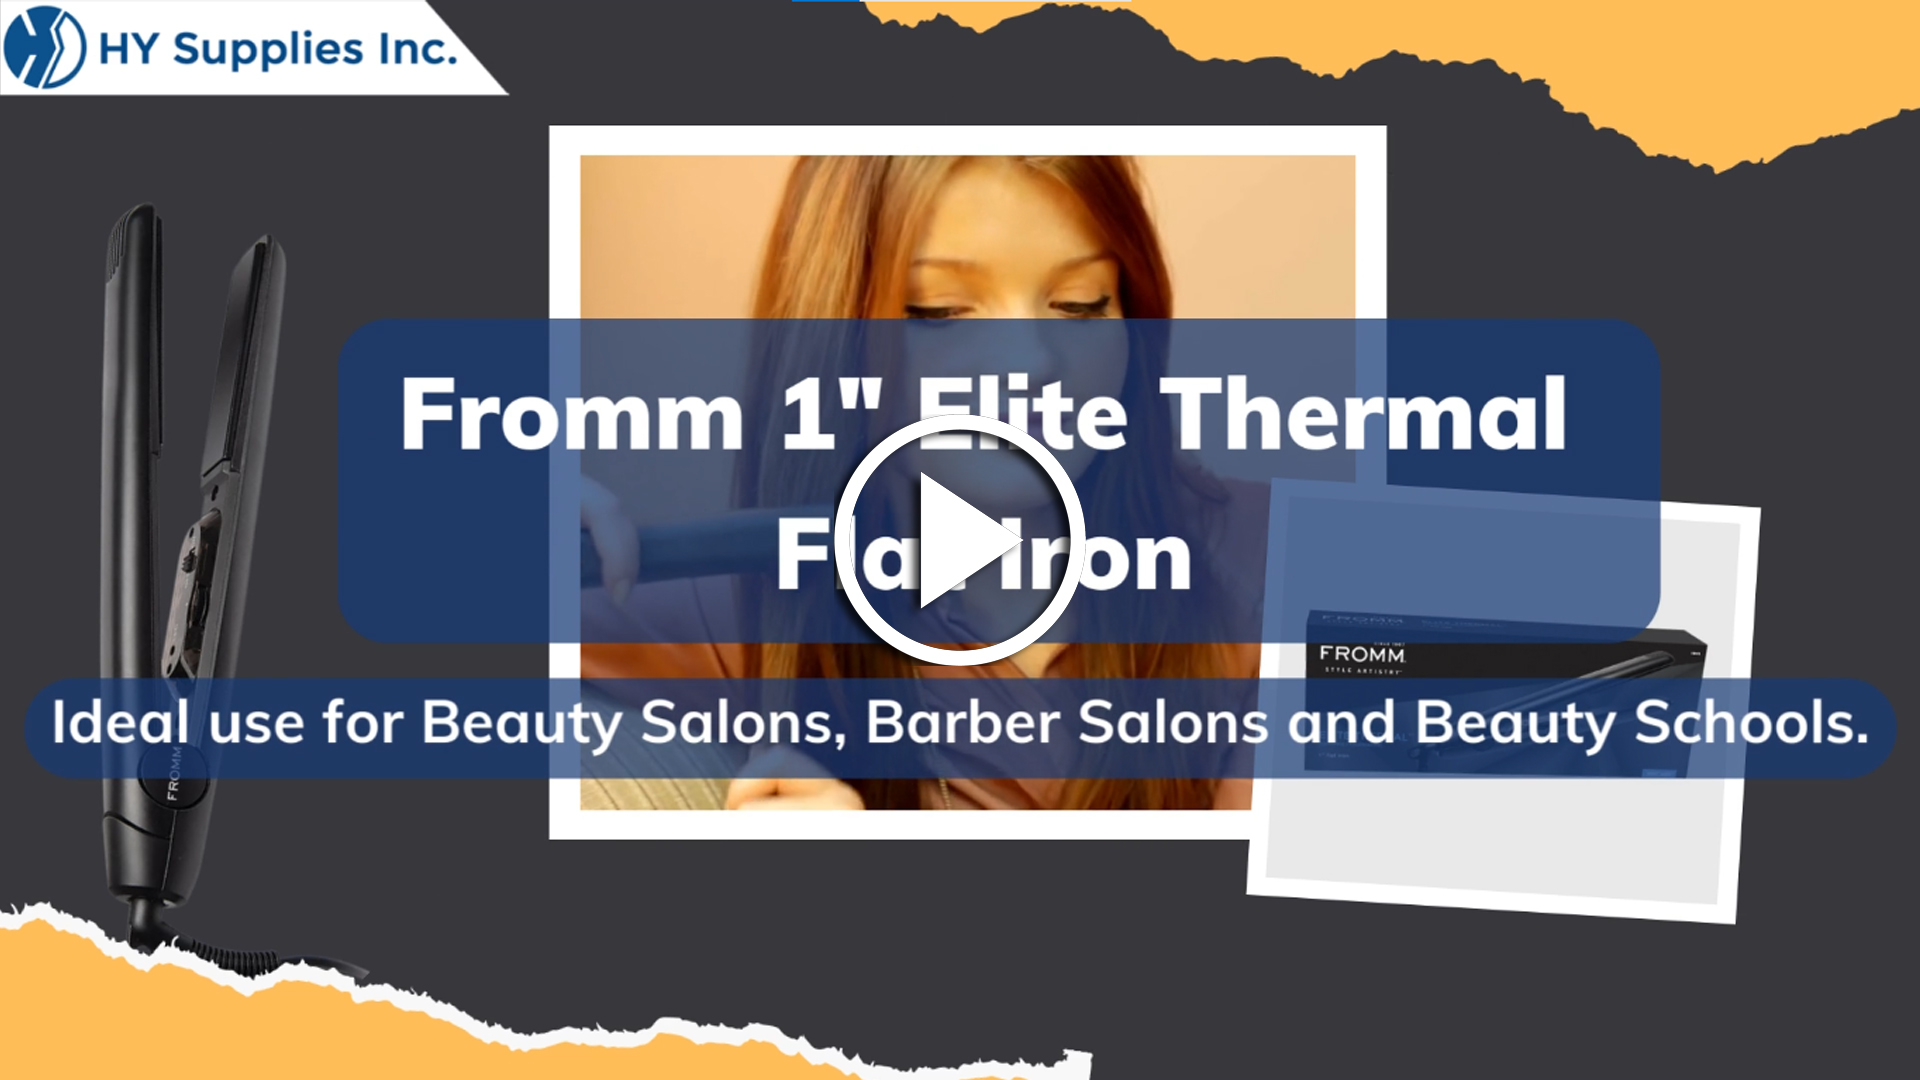 Fromm 1" Elite Thermal Flat Iron